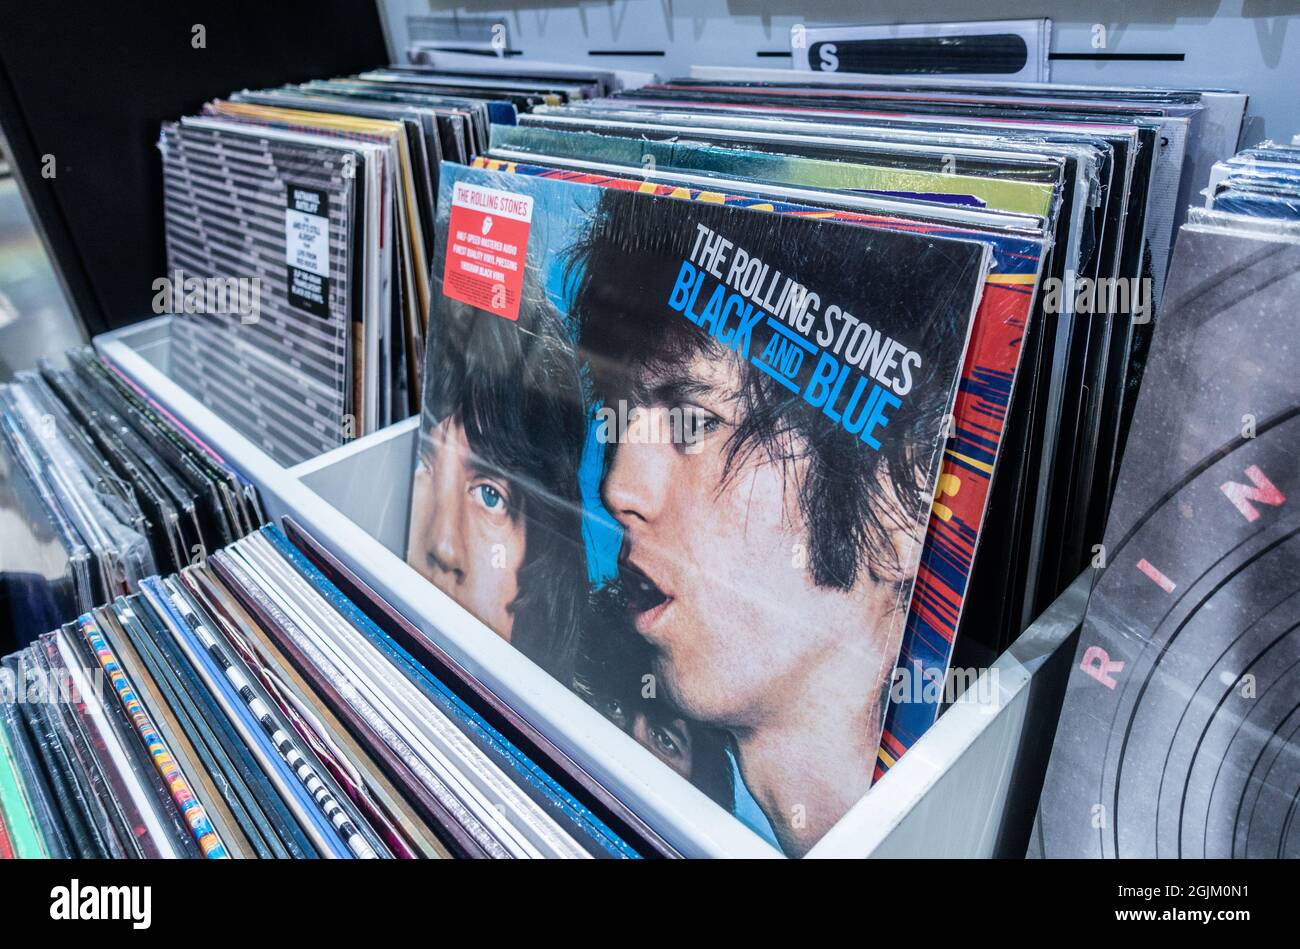 The Rolling Stones Black and Blue album, vinyl record in record store Stock Photo